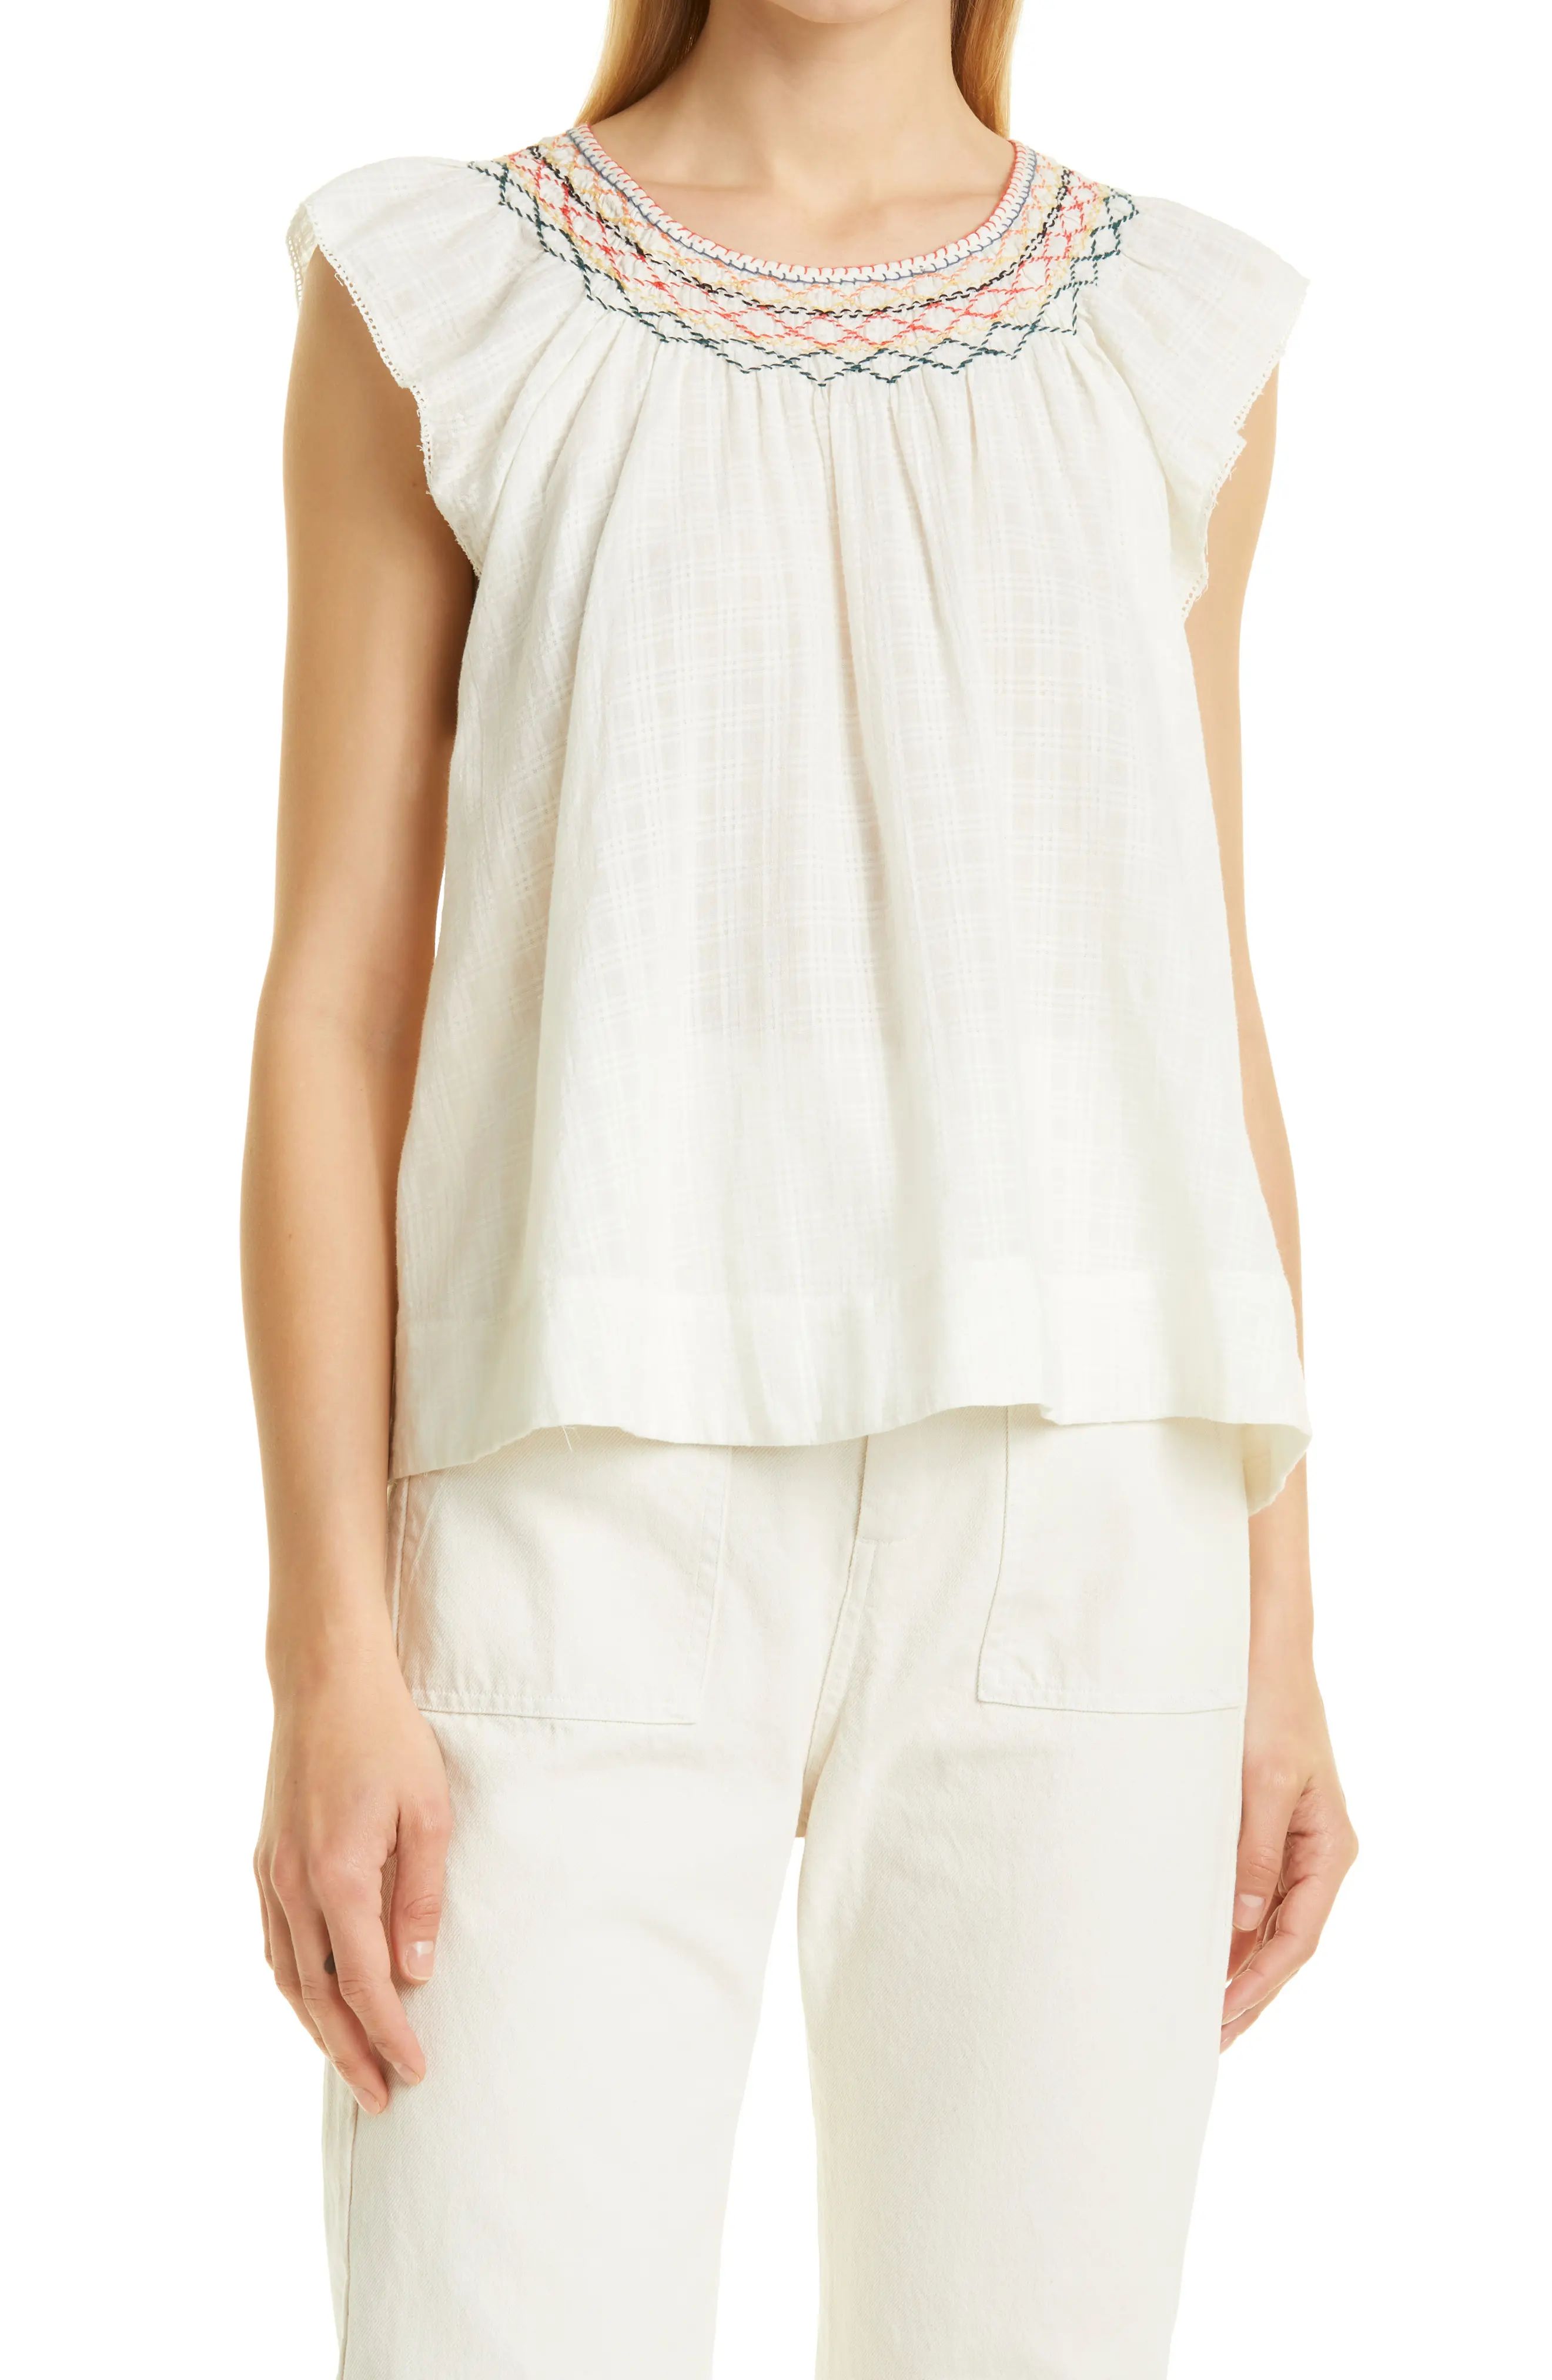 THE GREAT. The Windswept Top in Cream at Nordstrom, Size 3 | Nordstrom